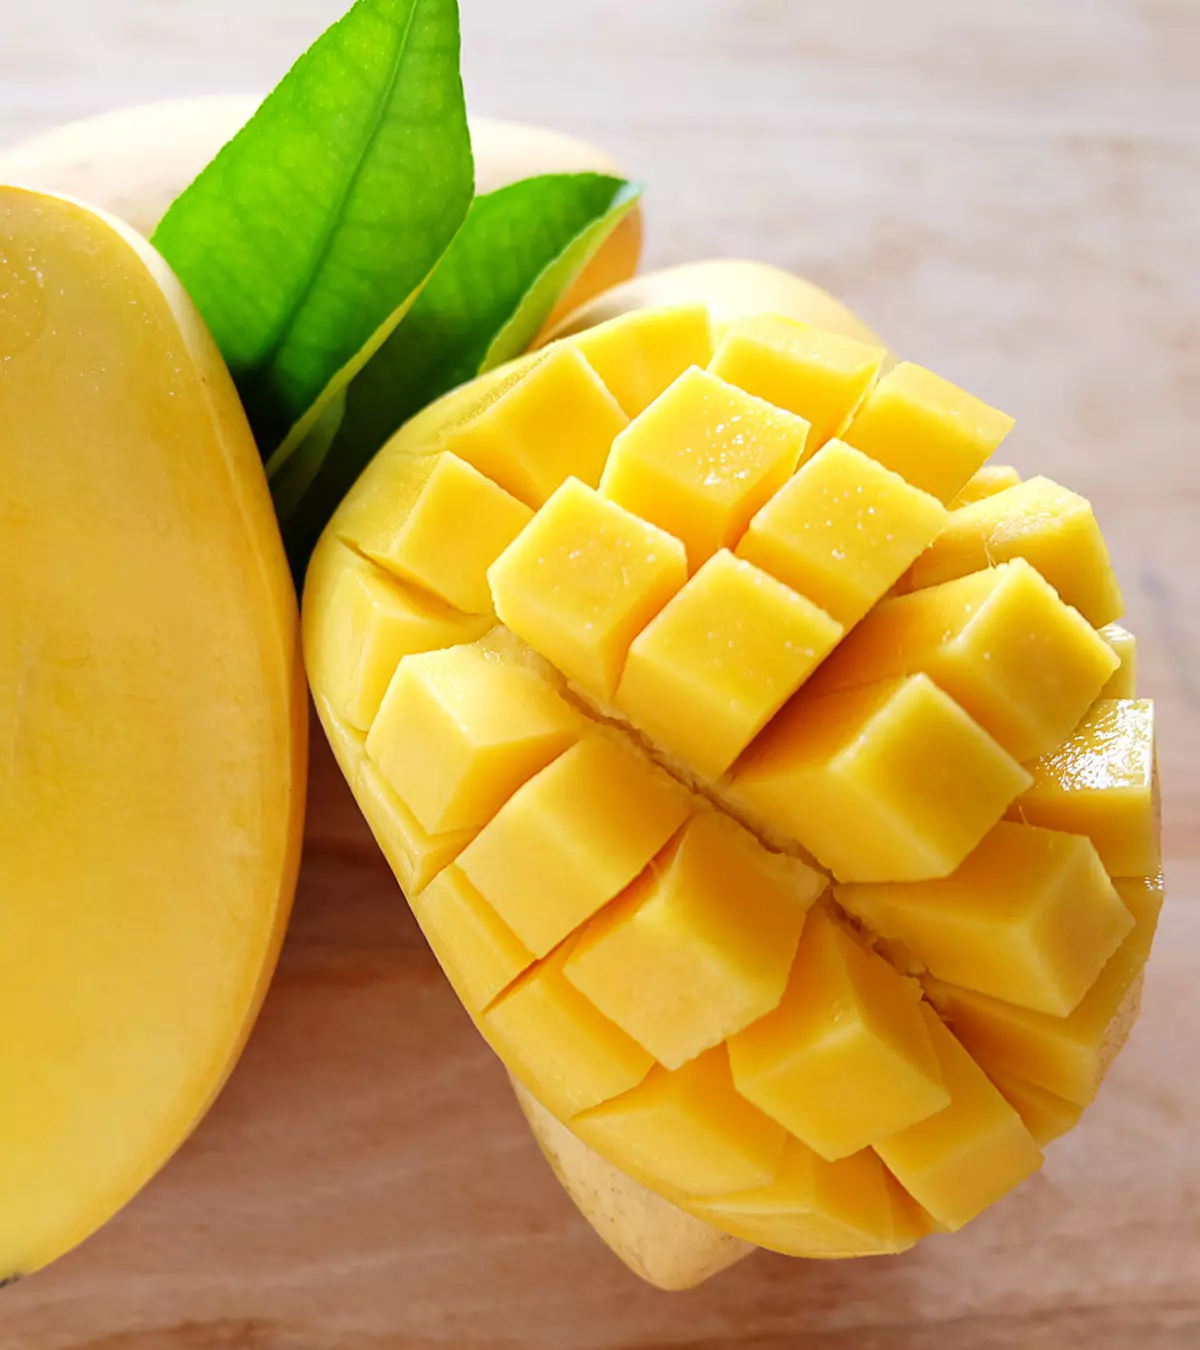 9-Proven-Health-Benefits-Of-Eating-Mangoes-In-Pregnancy1